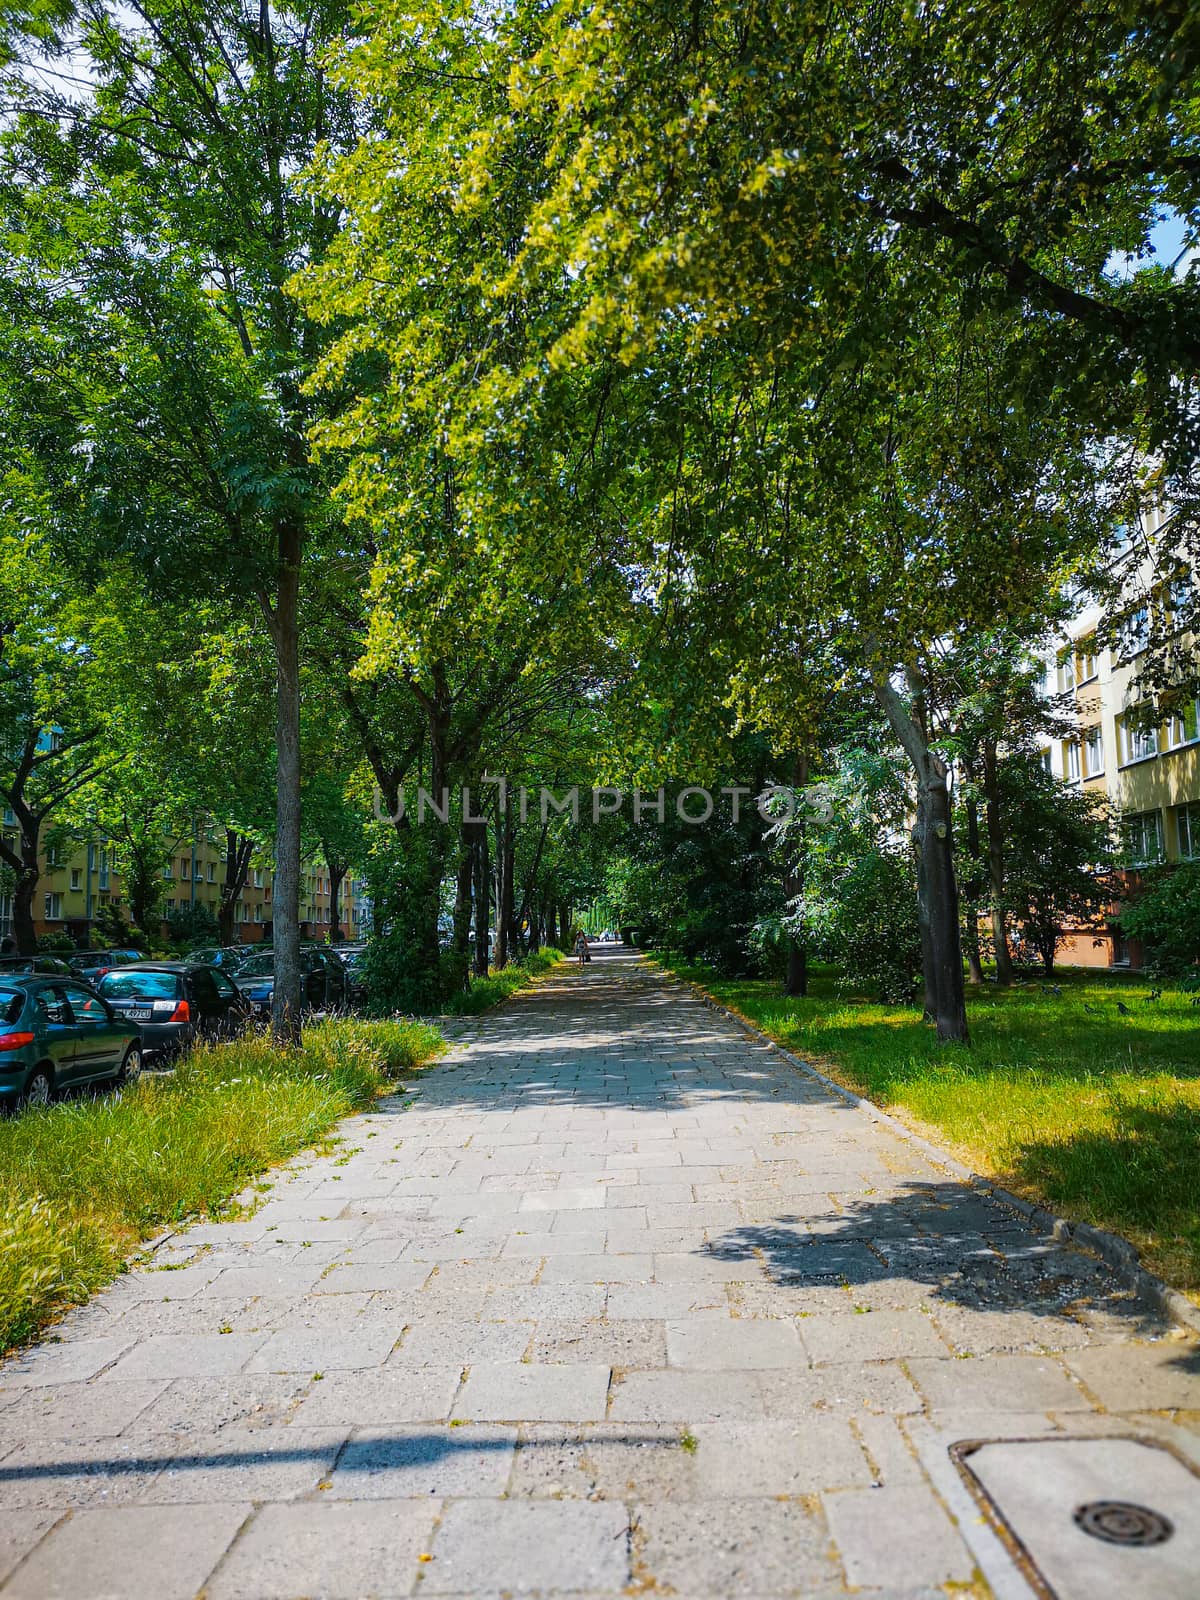 Pavement next to street with green trees above at summer sunny day by Wierzchu